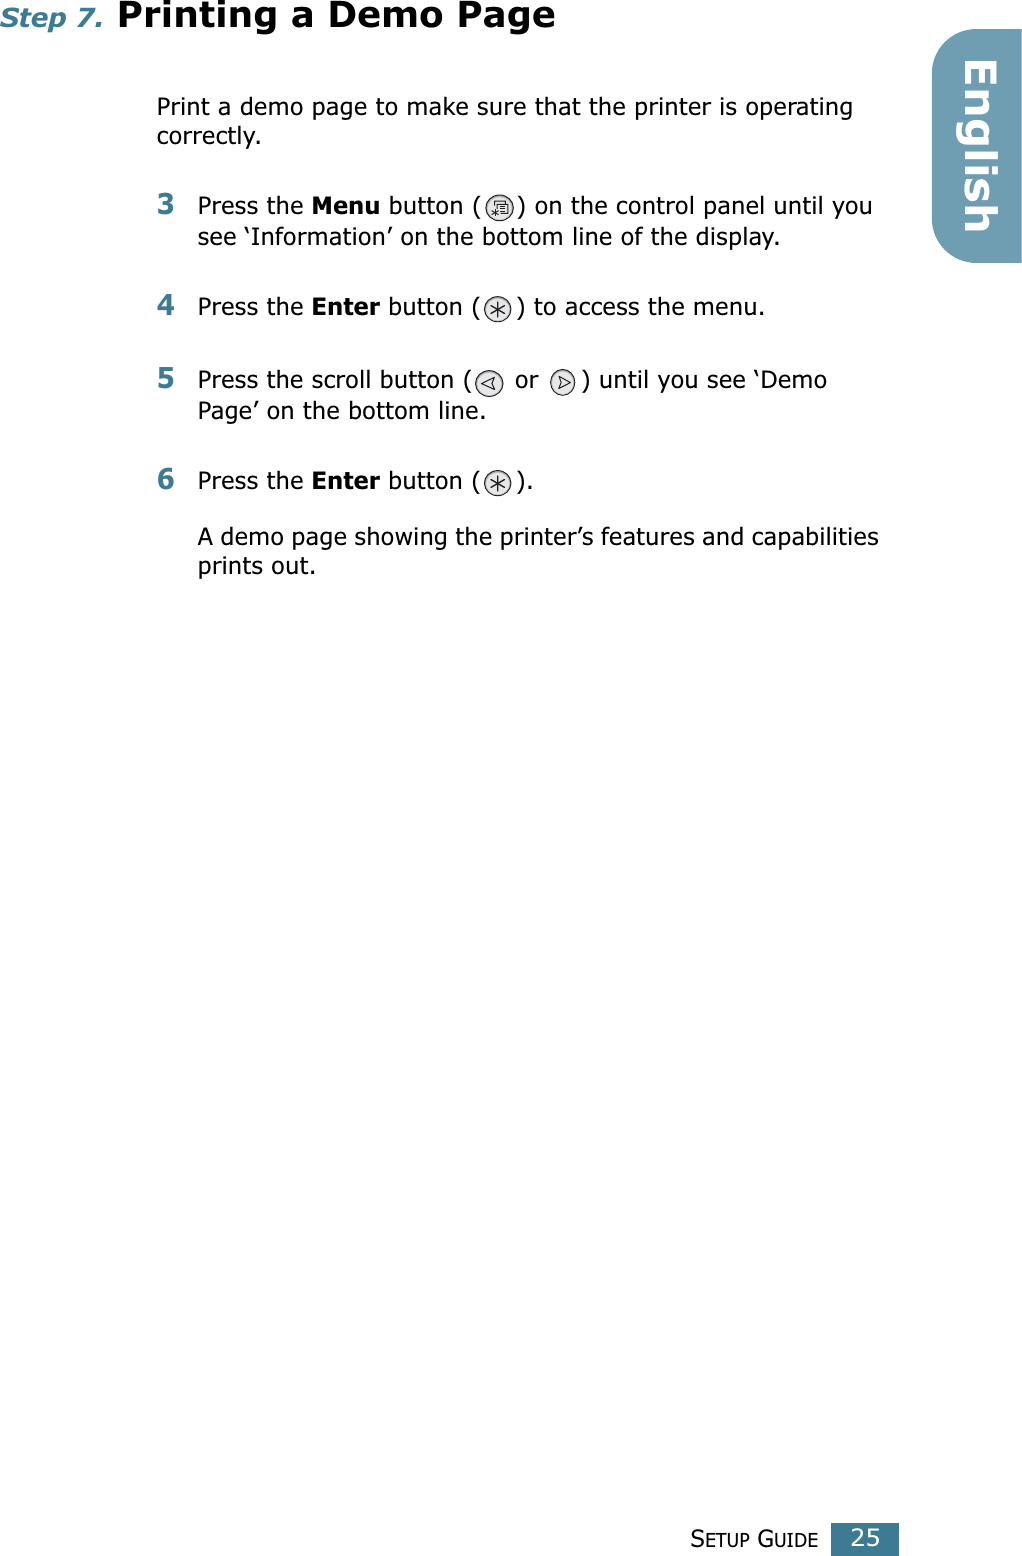 SETUP GUIDE25EnglishStep 7. Printing a Demo PagePrint a demo page to make sure that the printer is operating correctly.3Press the Menu button ( ) on the control panel until you see ‘Information’ on the bottom line of the display.4Press the Enter button ( ) to access the menu.5Press the scroll button (  or  ) until you see ‘Demo Page’ on the bottom line.6Press the Enter button ( ).A demo page showing the printer’s features and capabilities prints out.